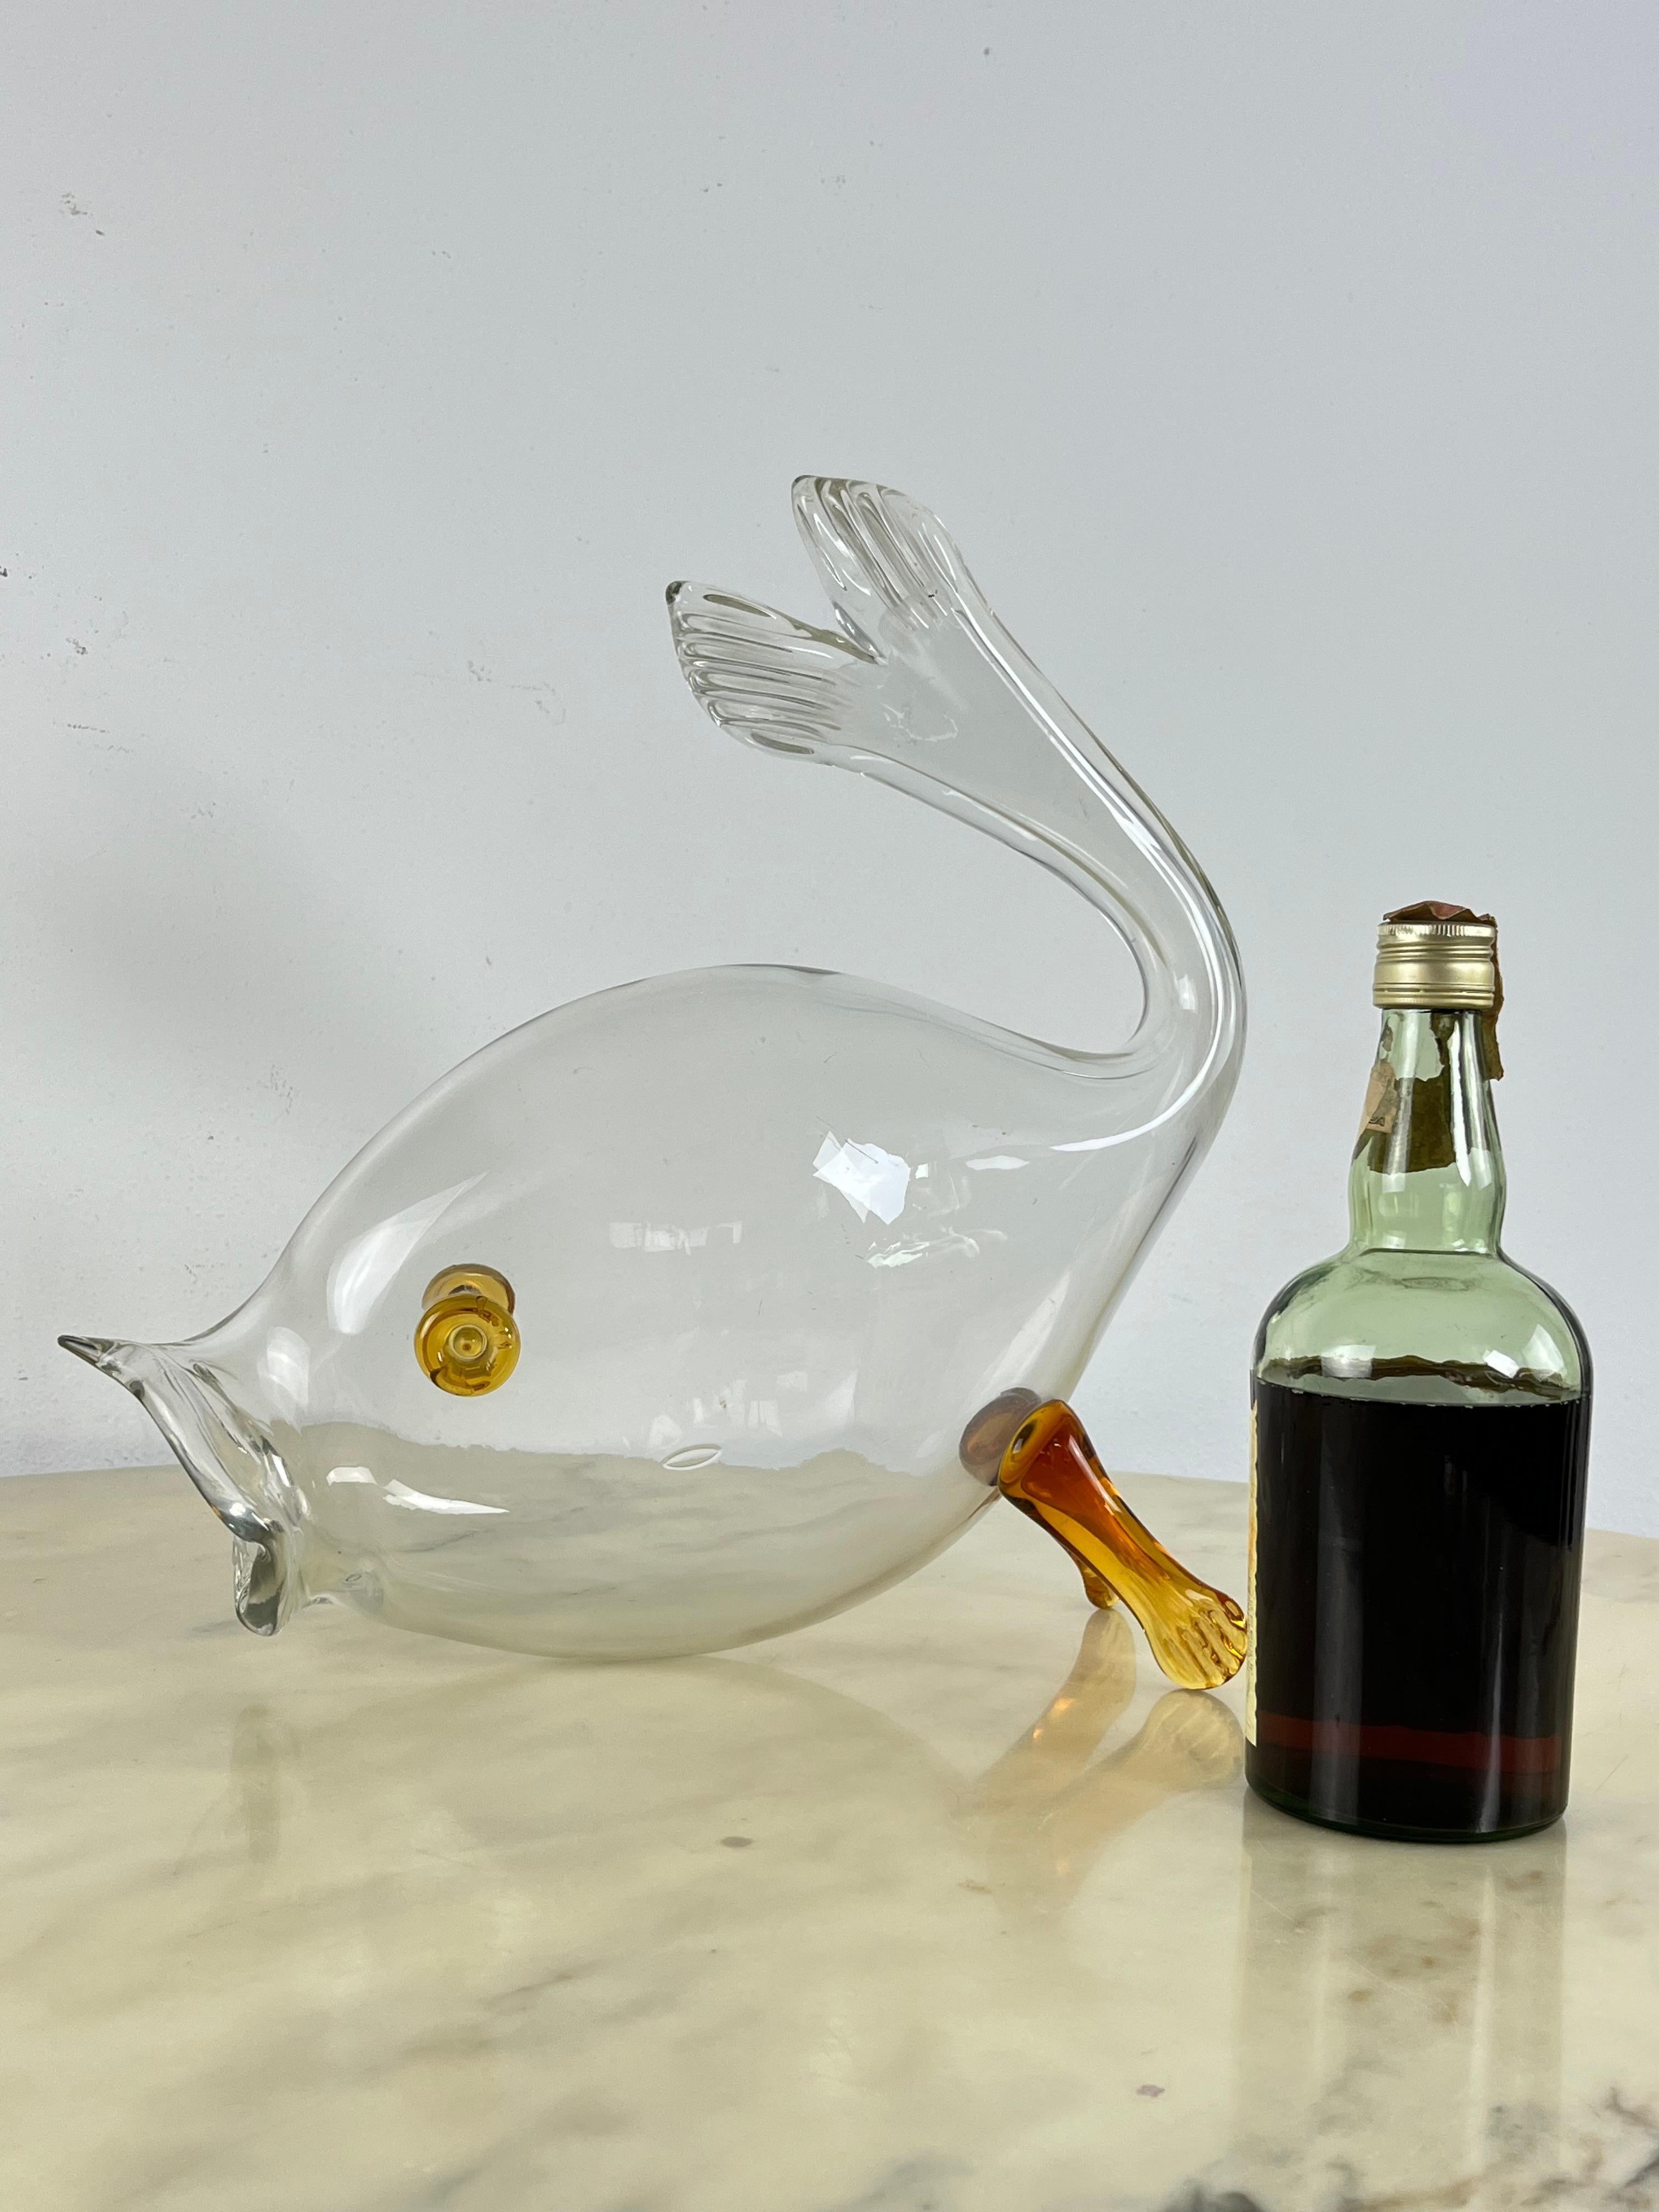 Large Mid-Century Murano glass fish attributed to Flavio Poli 1950s
Purchased by a family member of mine in Venice, in one of the most prestigious shops in Piazza San Marco.
Intact and in good condition, small signs of aging.
Small air bubbles can